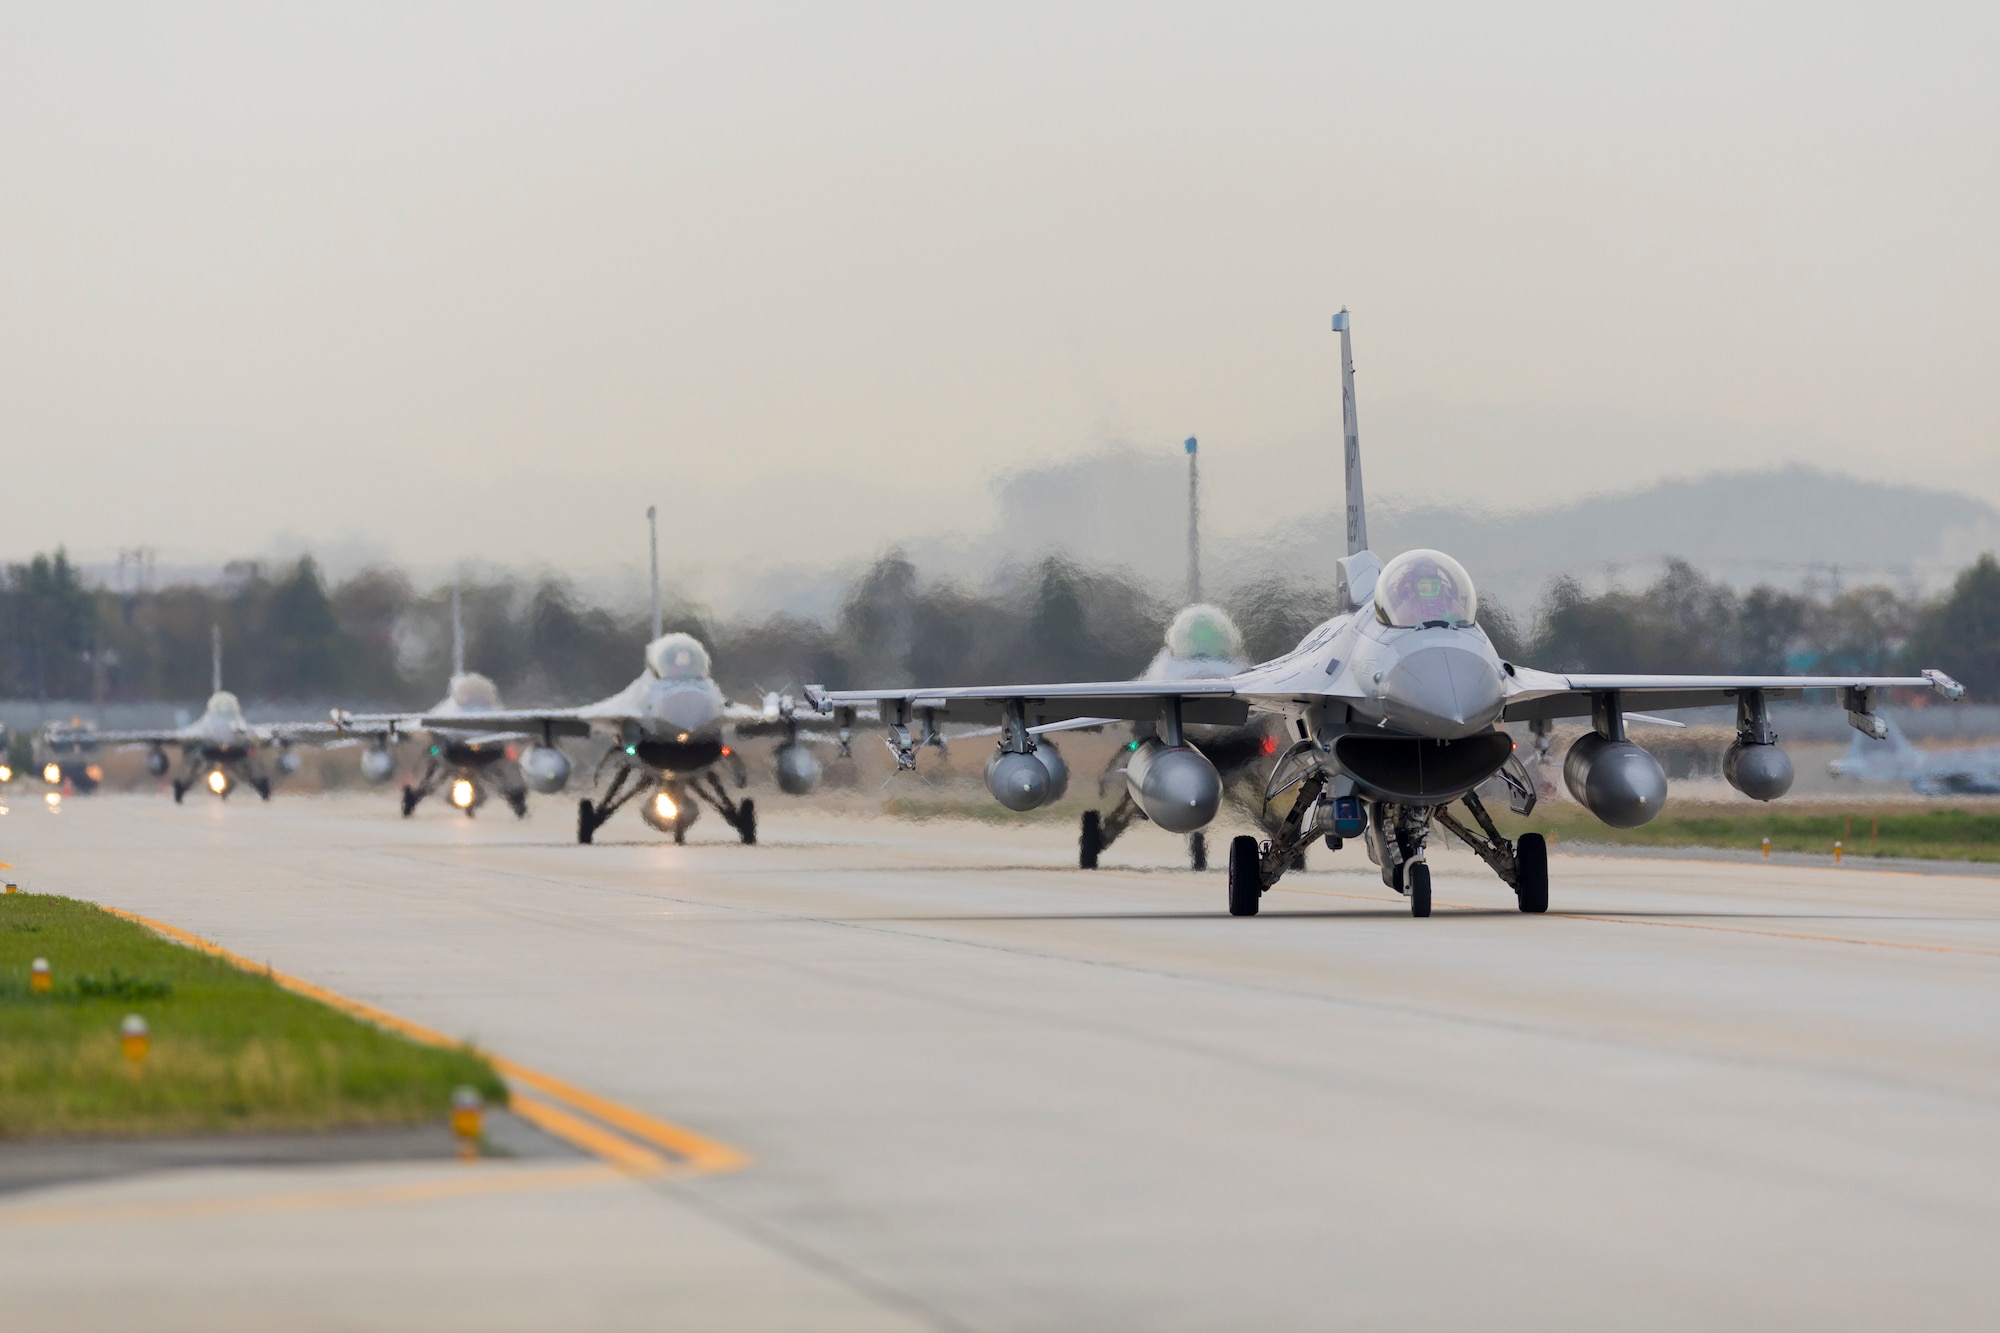 U.S. Air Force F-16 Fighting Falcons from the 8th Fighter Wing, Kunsan Air Base, Republic of Korea, and KF-16 Fighting Falcons with the ROK Air Force taxi on the flight line after arriving for the Fiscal Year 2023 Korea Flying Training at Gwangju AB, ROK, April 14, 2023.